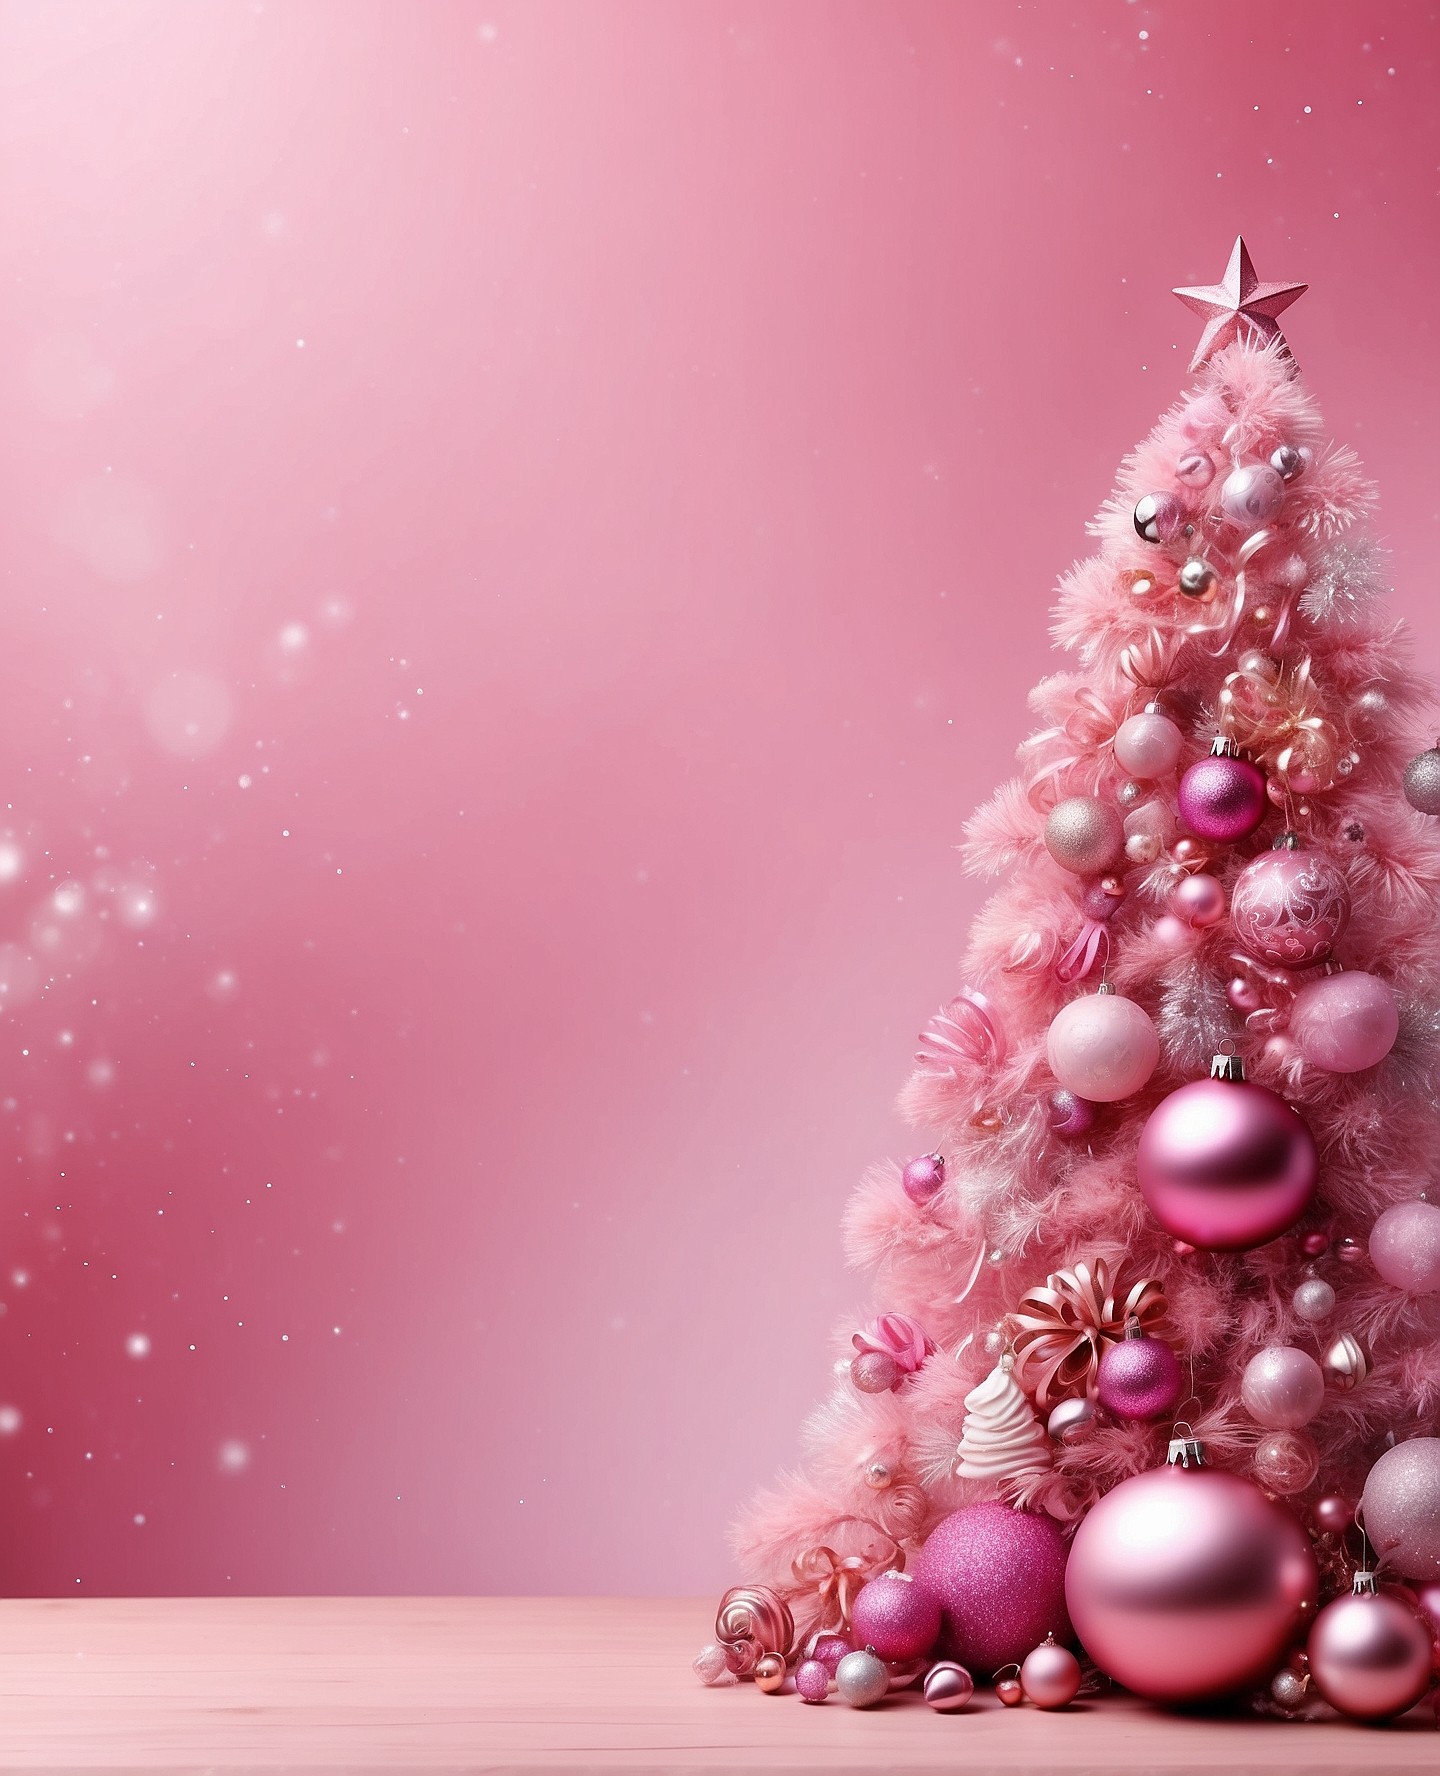 Pink Christmas Background Wallpaper 